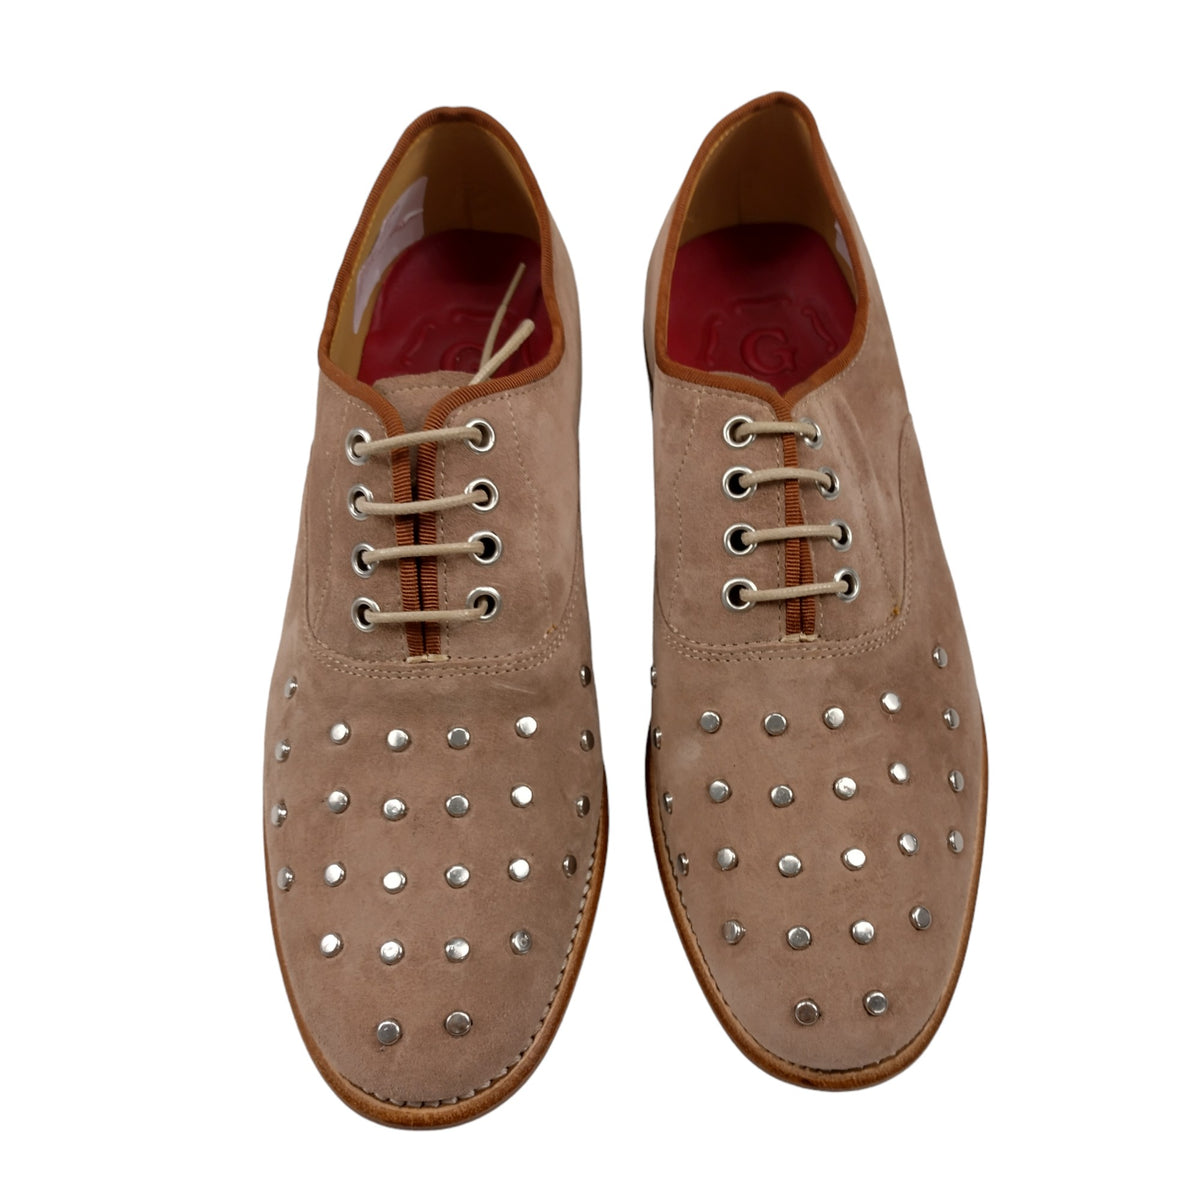 Grenson Brown Rose Suede Stud Shoes